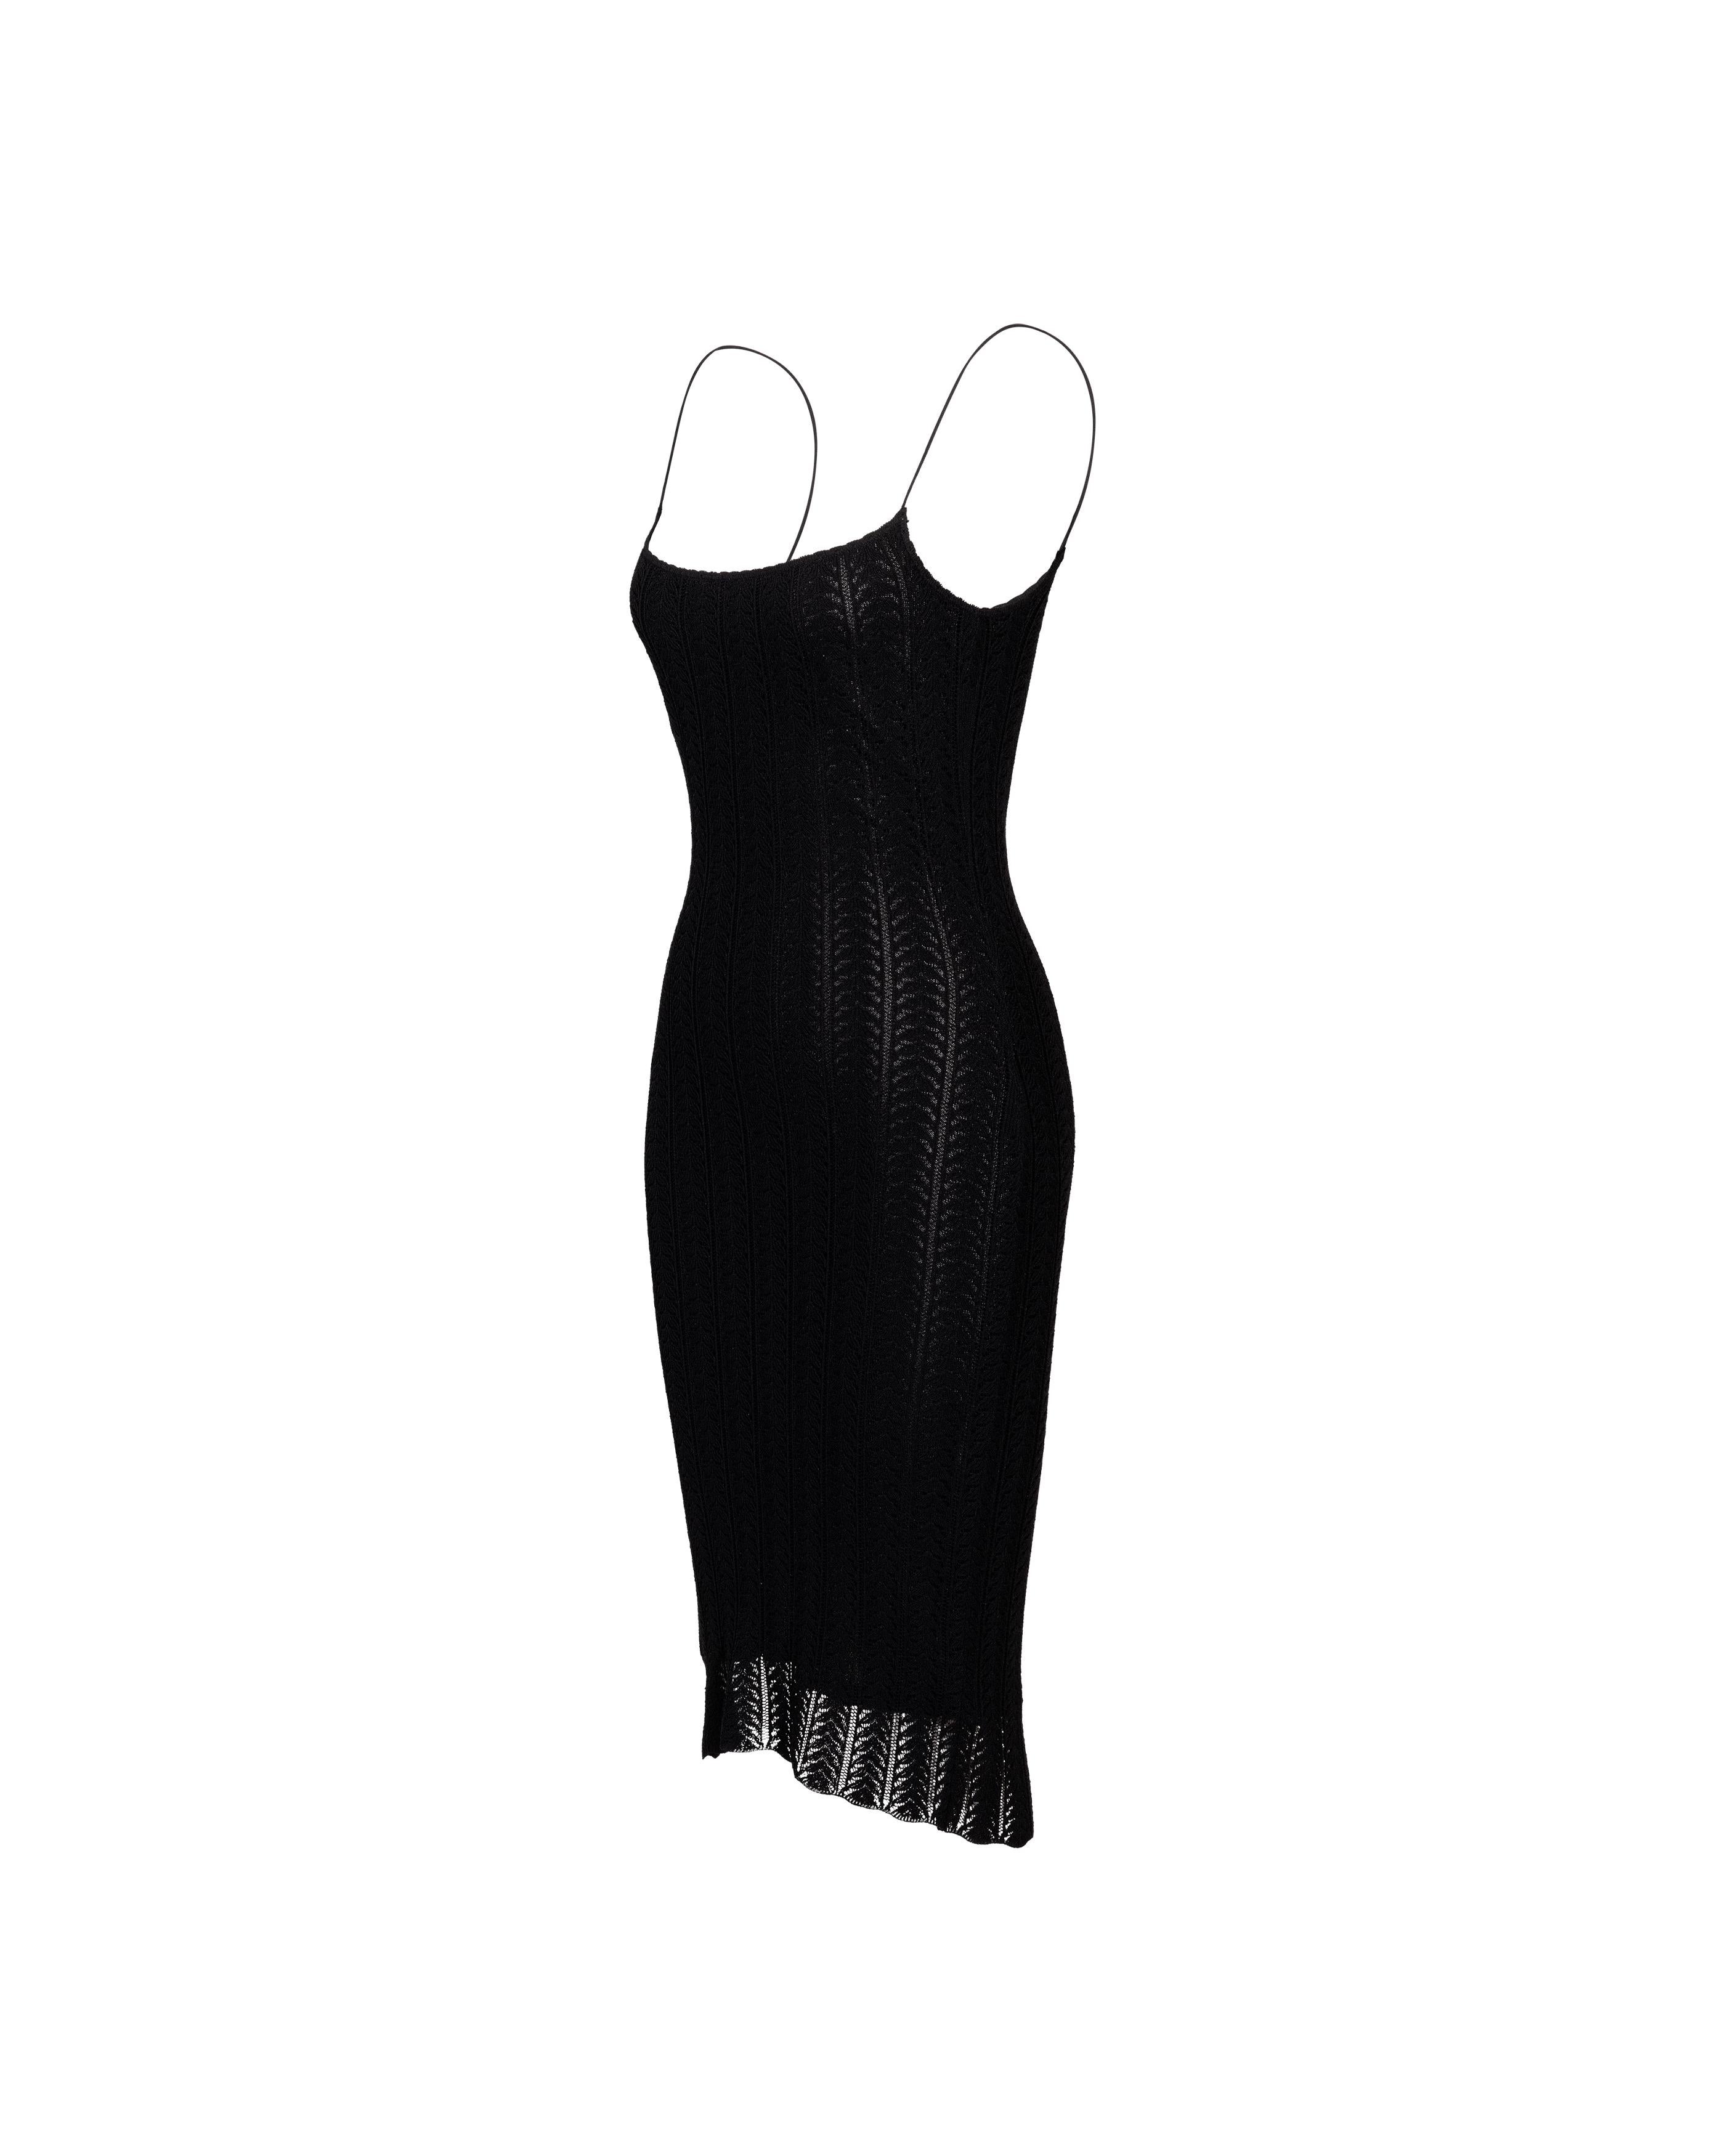 Resort 2000 John Galliano black openwork knit knee-length slip dress. Sleeveless spaghetti strap bodycon dress; semi-sheer open perforated geometric vertical stripe knit mesh. Fully lined with black lining that ends approximately 2